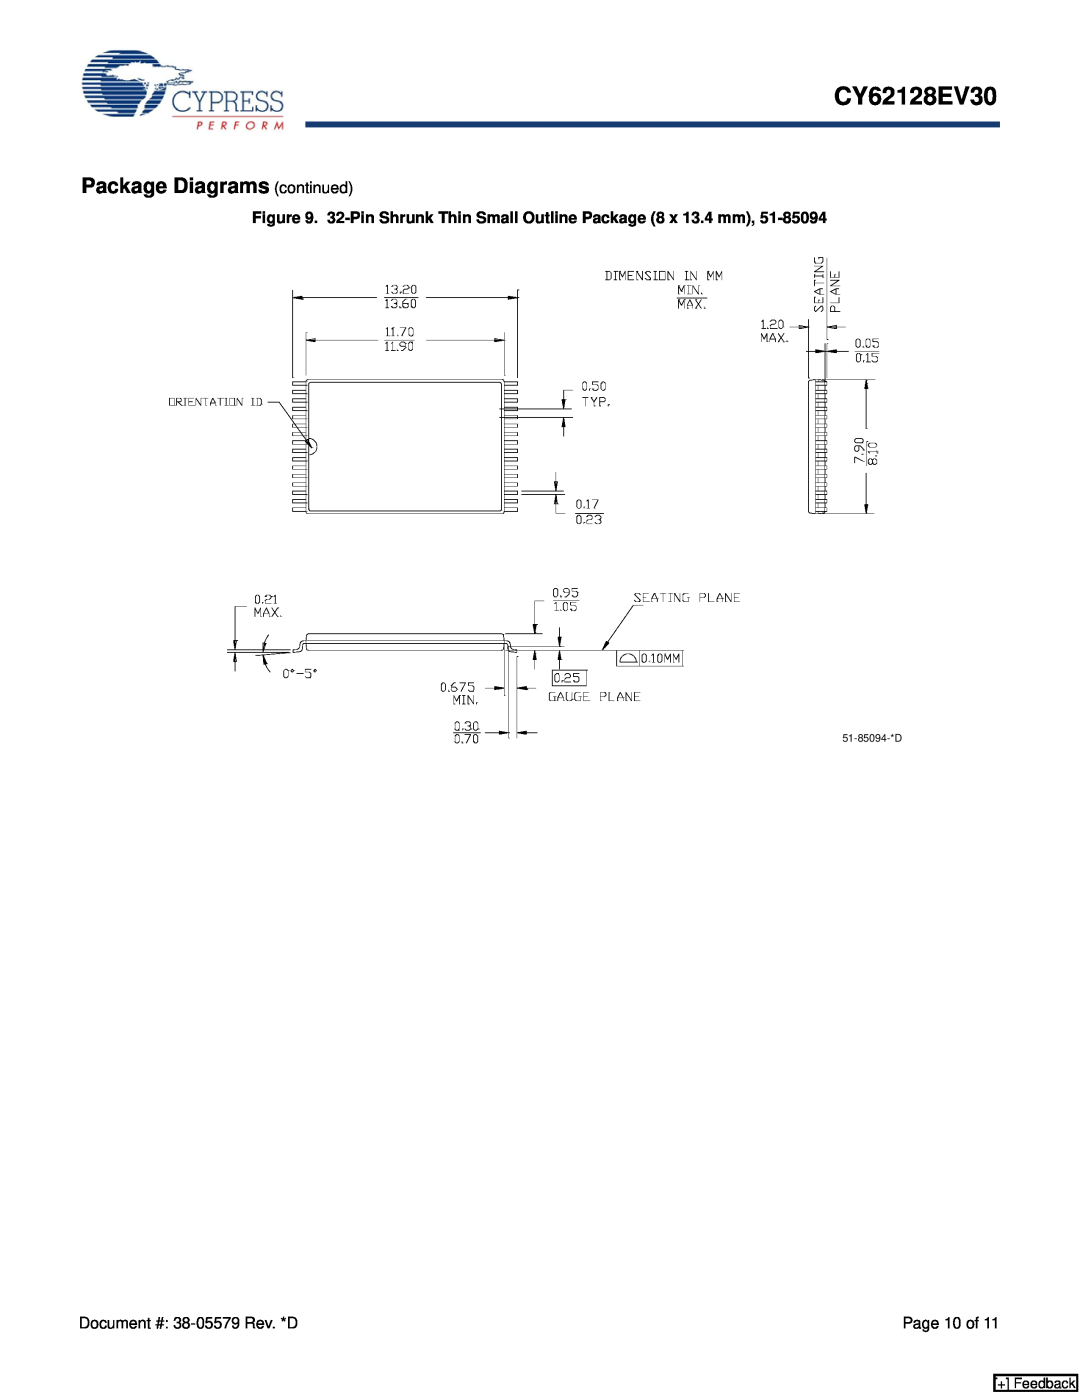 Cypress CY62128EV30 manual Package Diagrams continued, 32-Pin Shrunk Thin Small Outline Package 8 x 13.4 mm, Page 10 of 